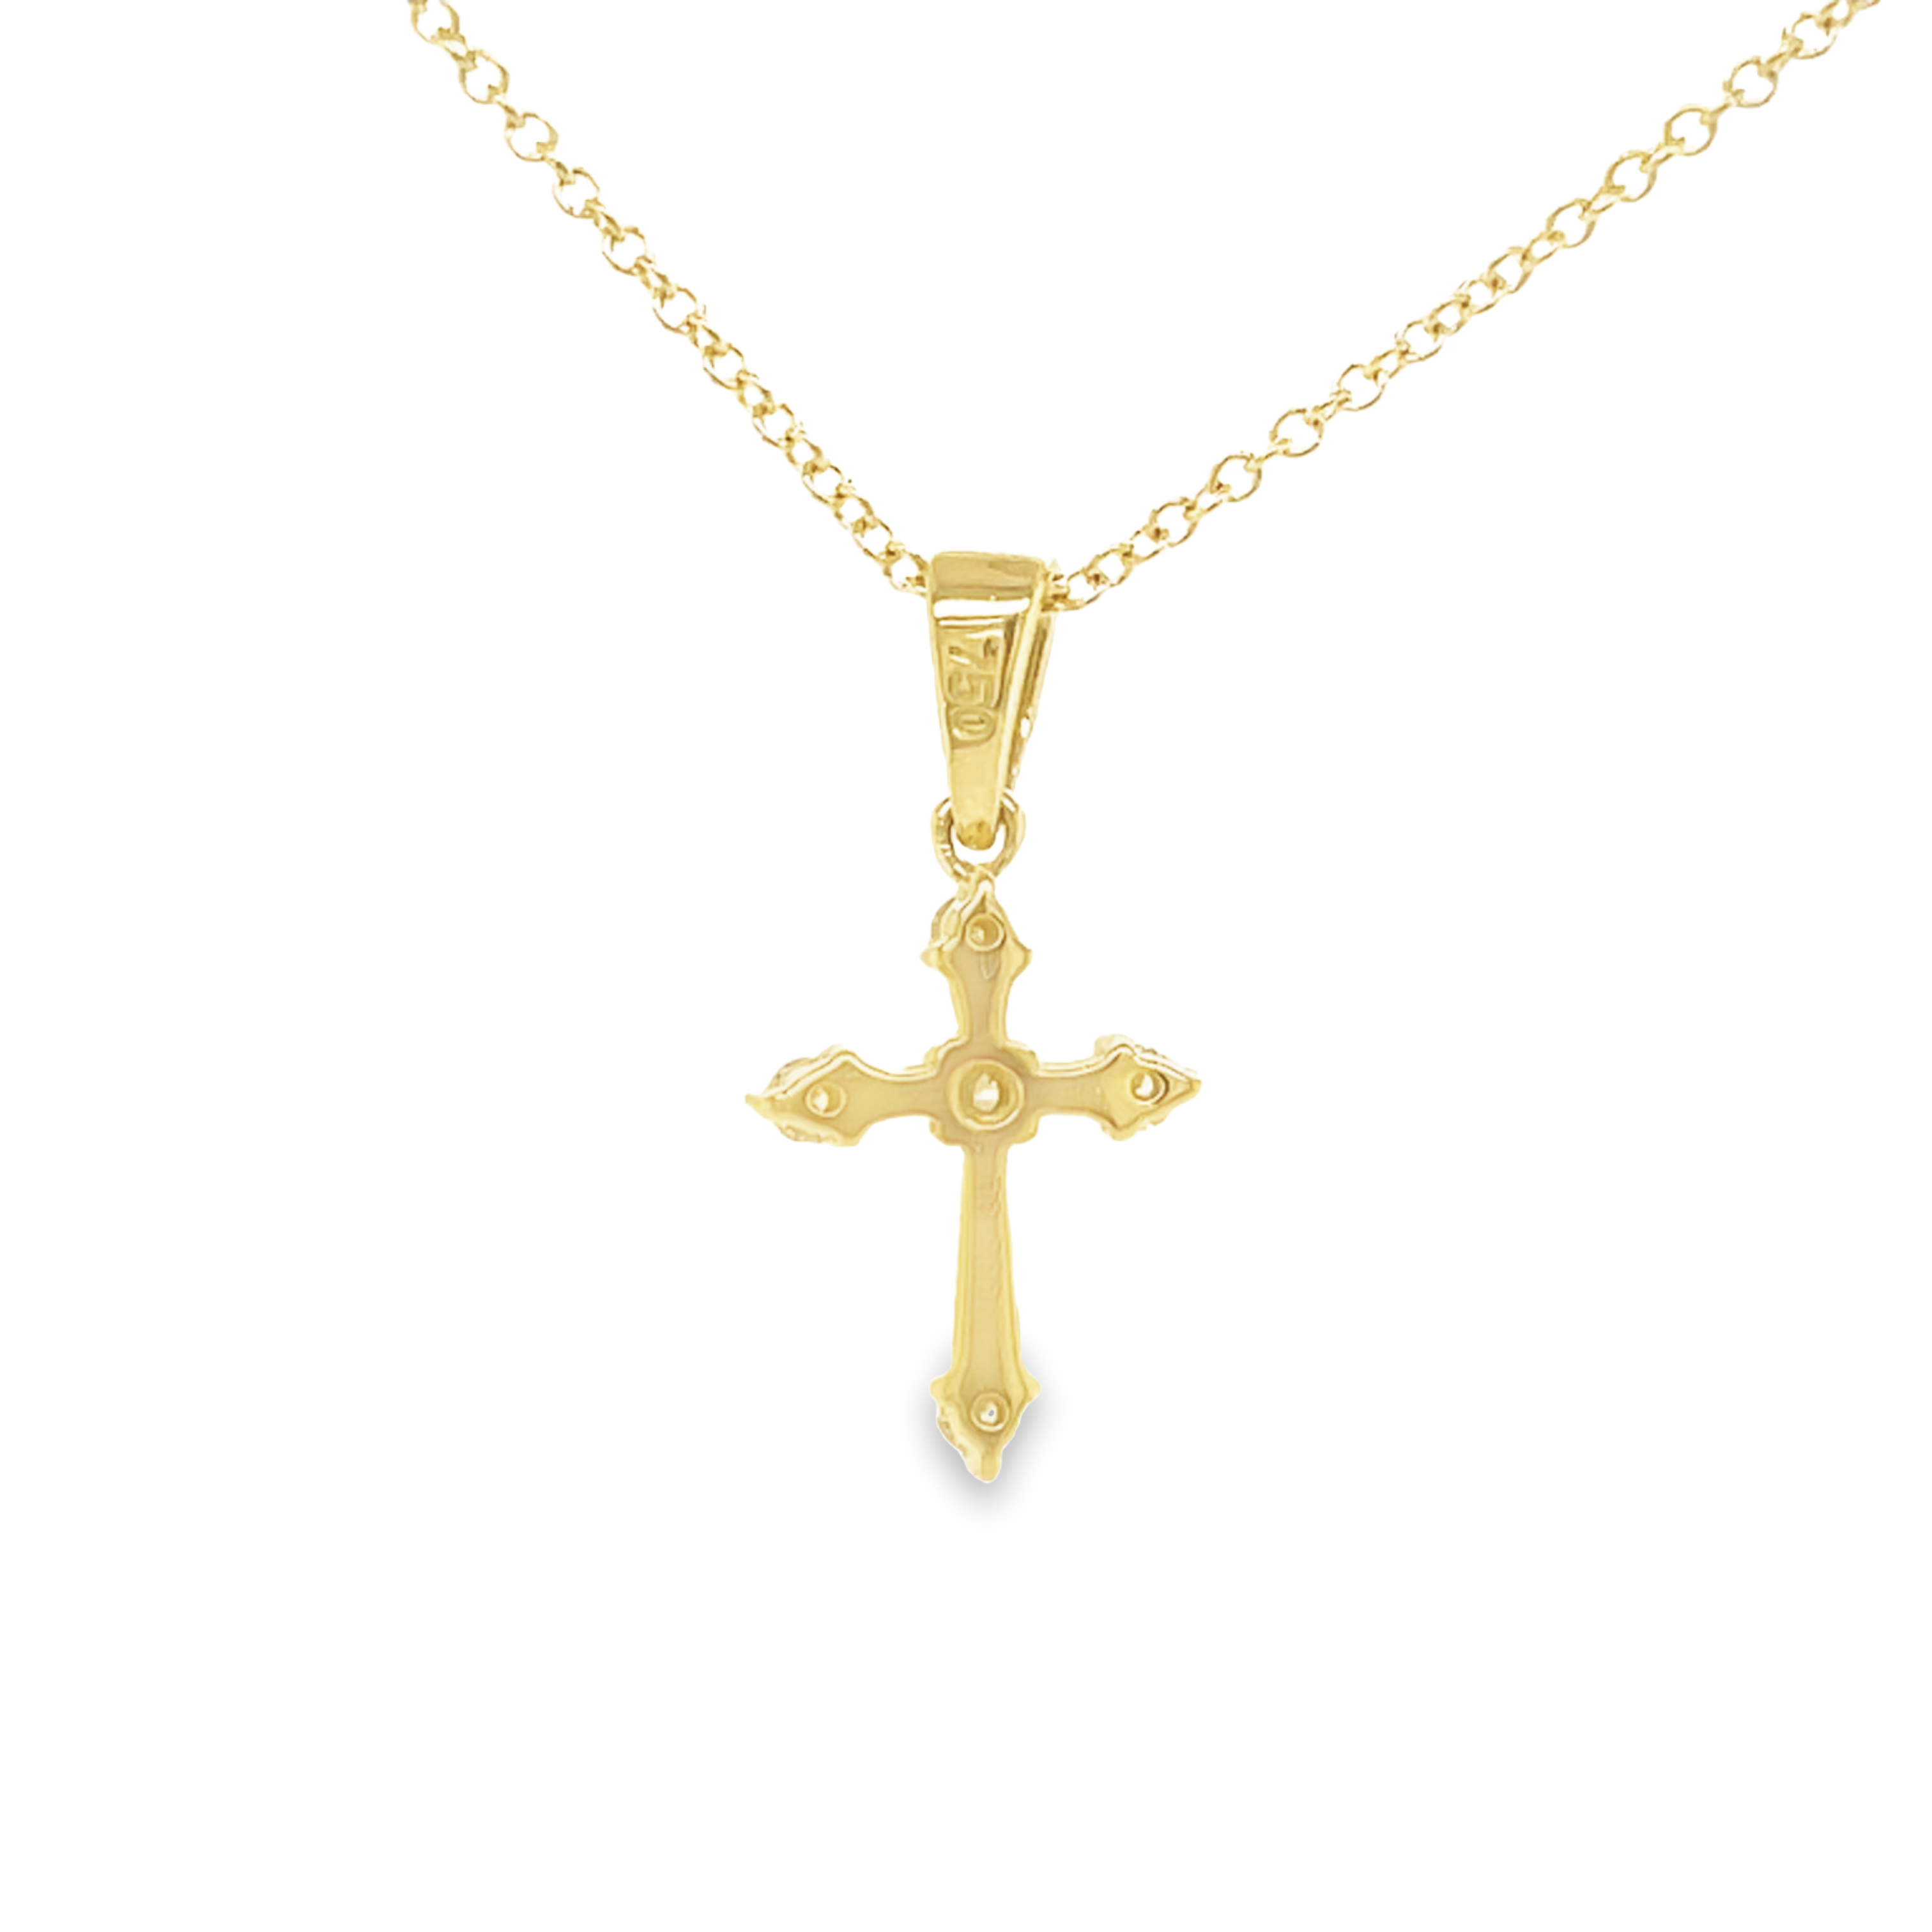 This magnificent 18k yellow gold cross pendant sparkles with 5 dazzling, Color E/F-VS1 diamonds totaling 0.10 cts and a secure bail. An optional 16", 1.1 mm chain is available for $199. 16 mm pendant.